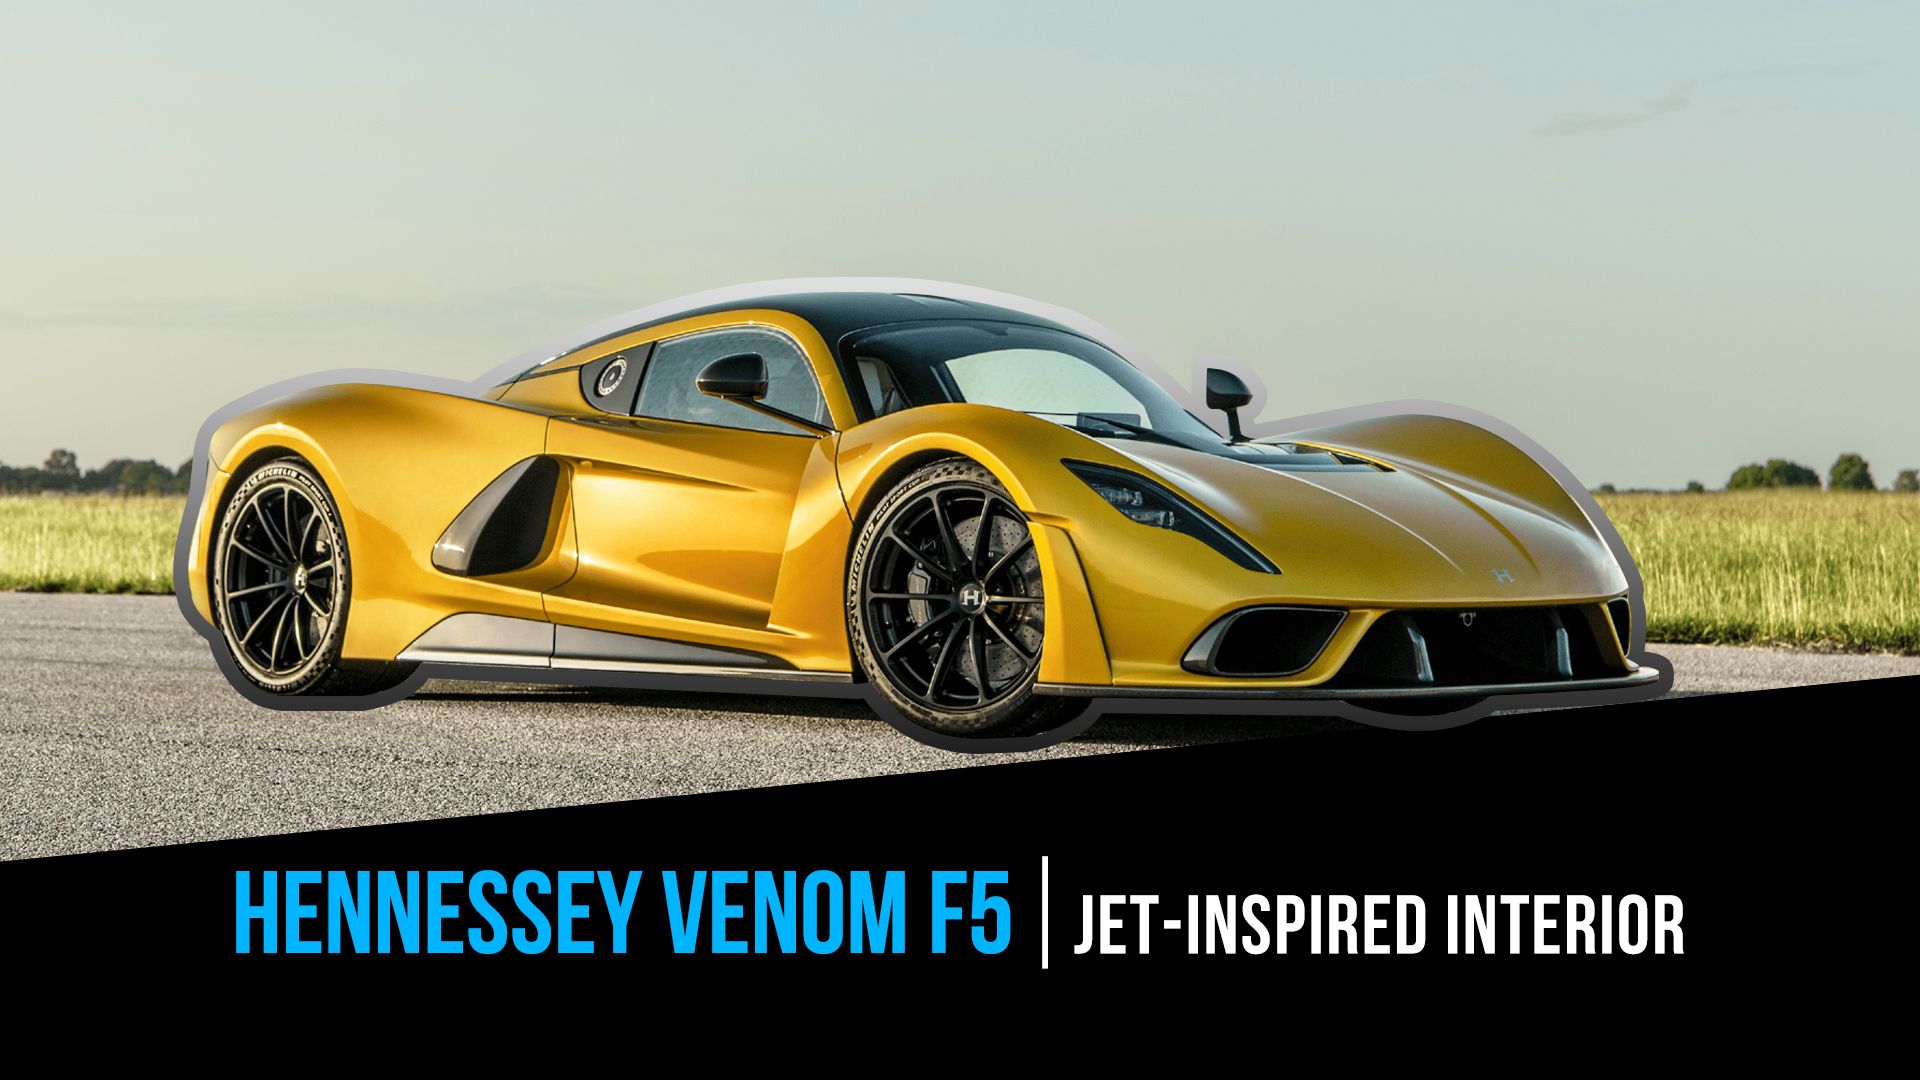 Hennessey F5 Roadster: price, performance and top speed details